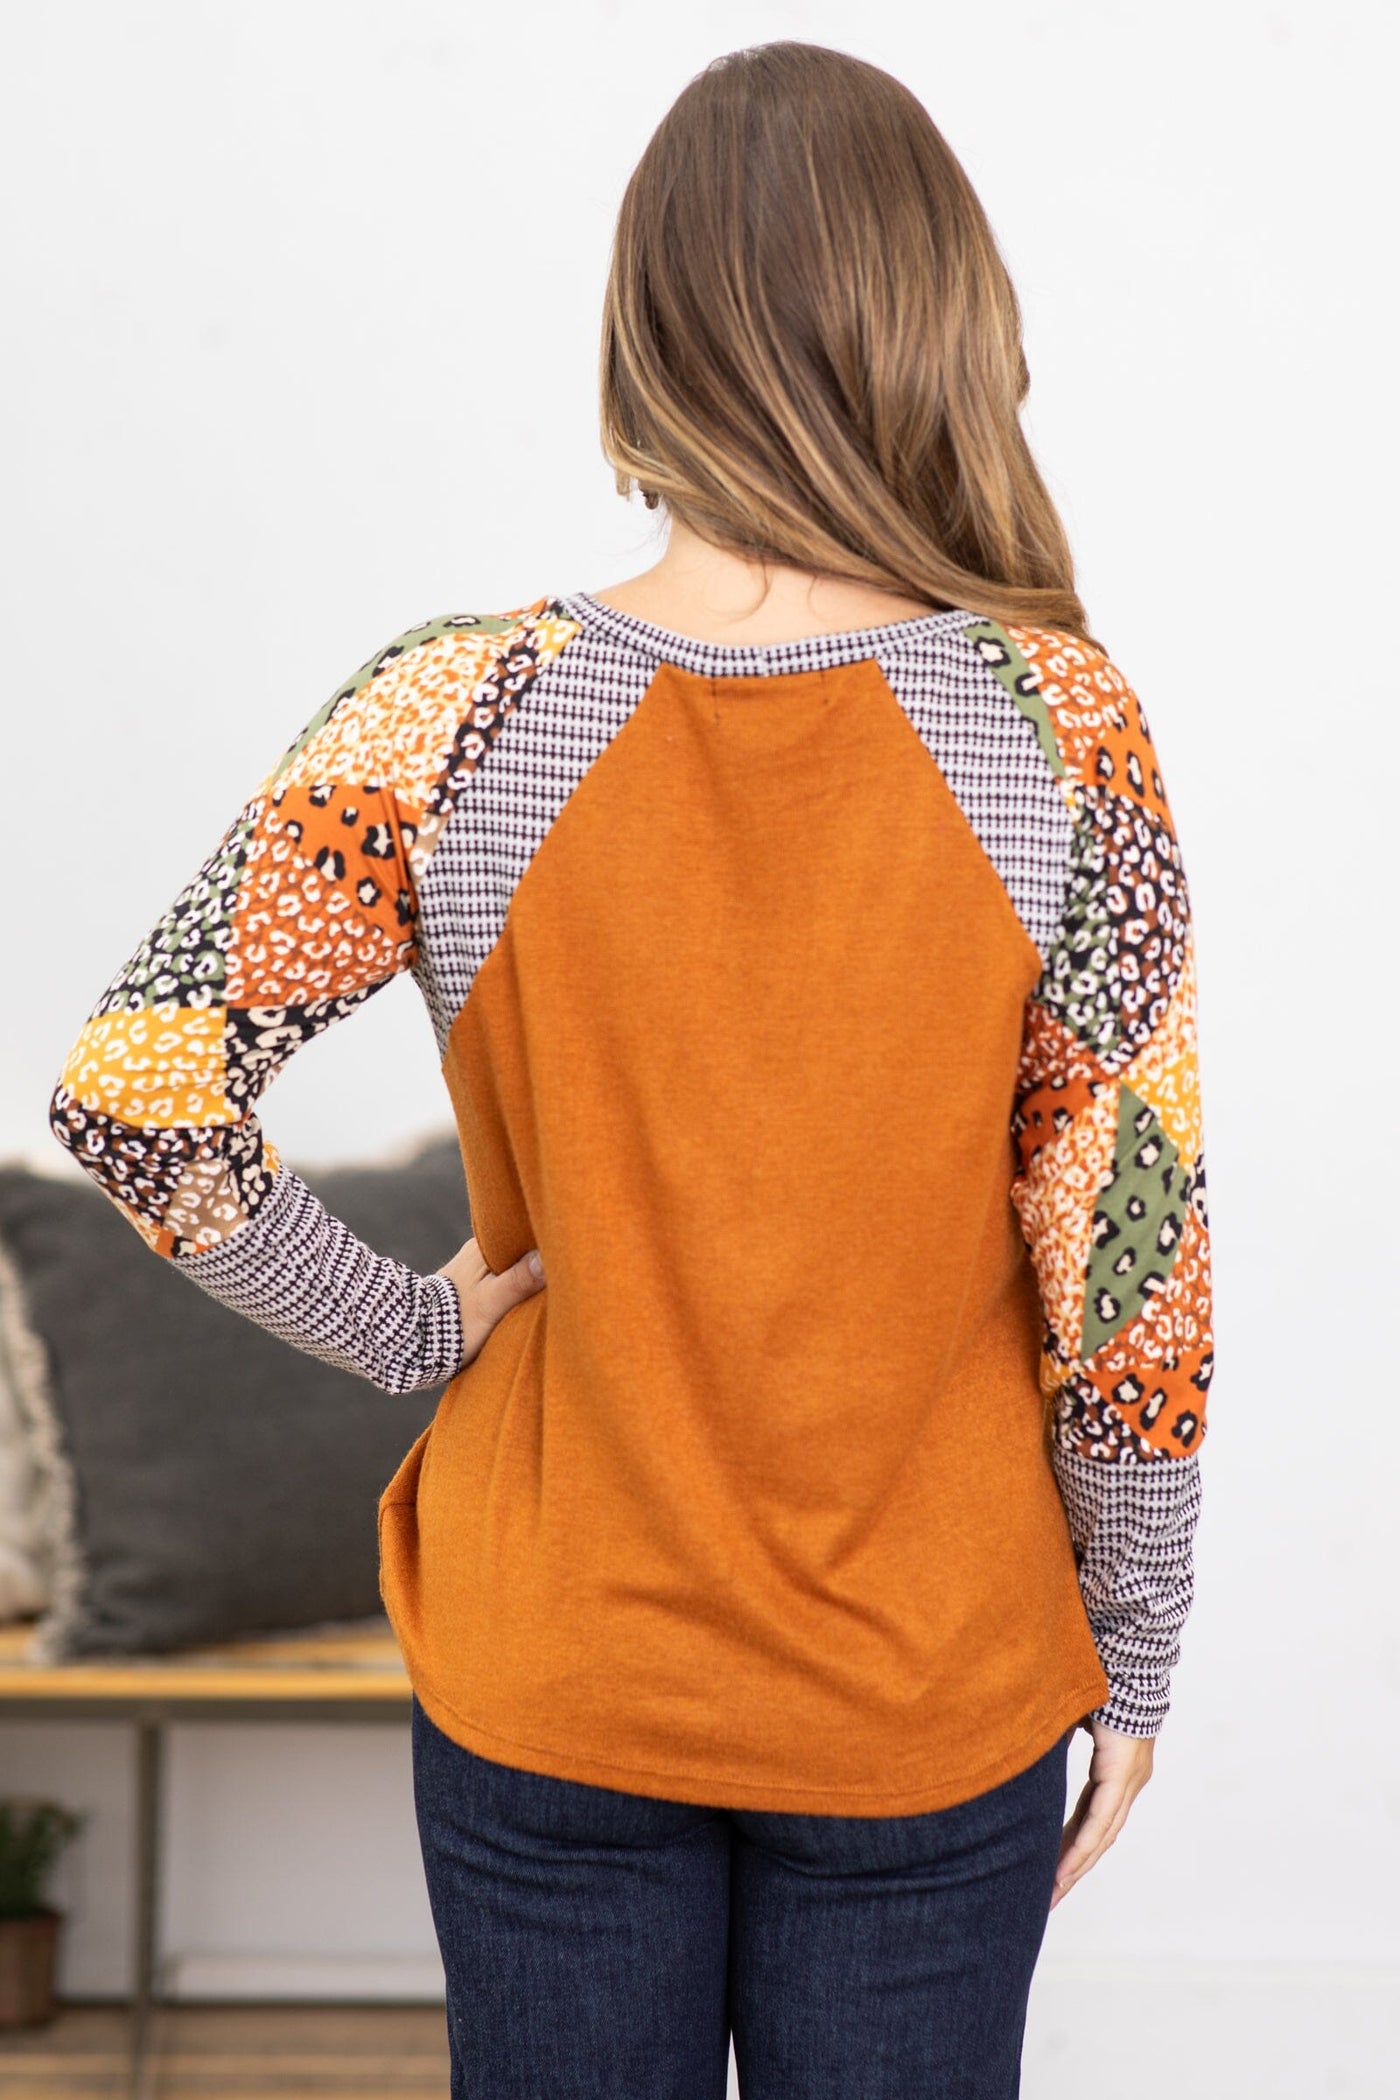 Cognac Top With Patchwork Print Sleeves - Filly Flair